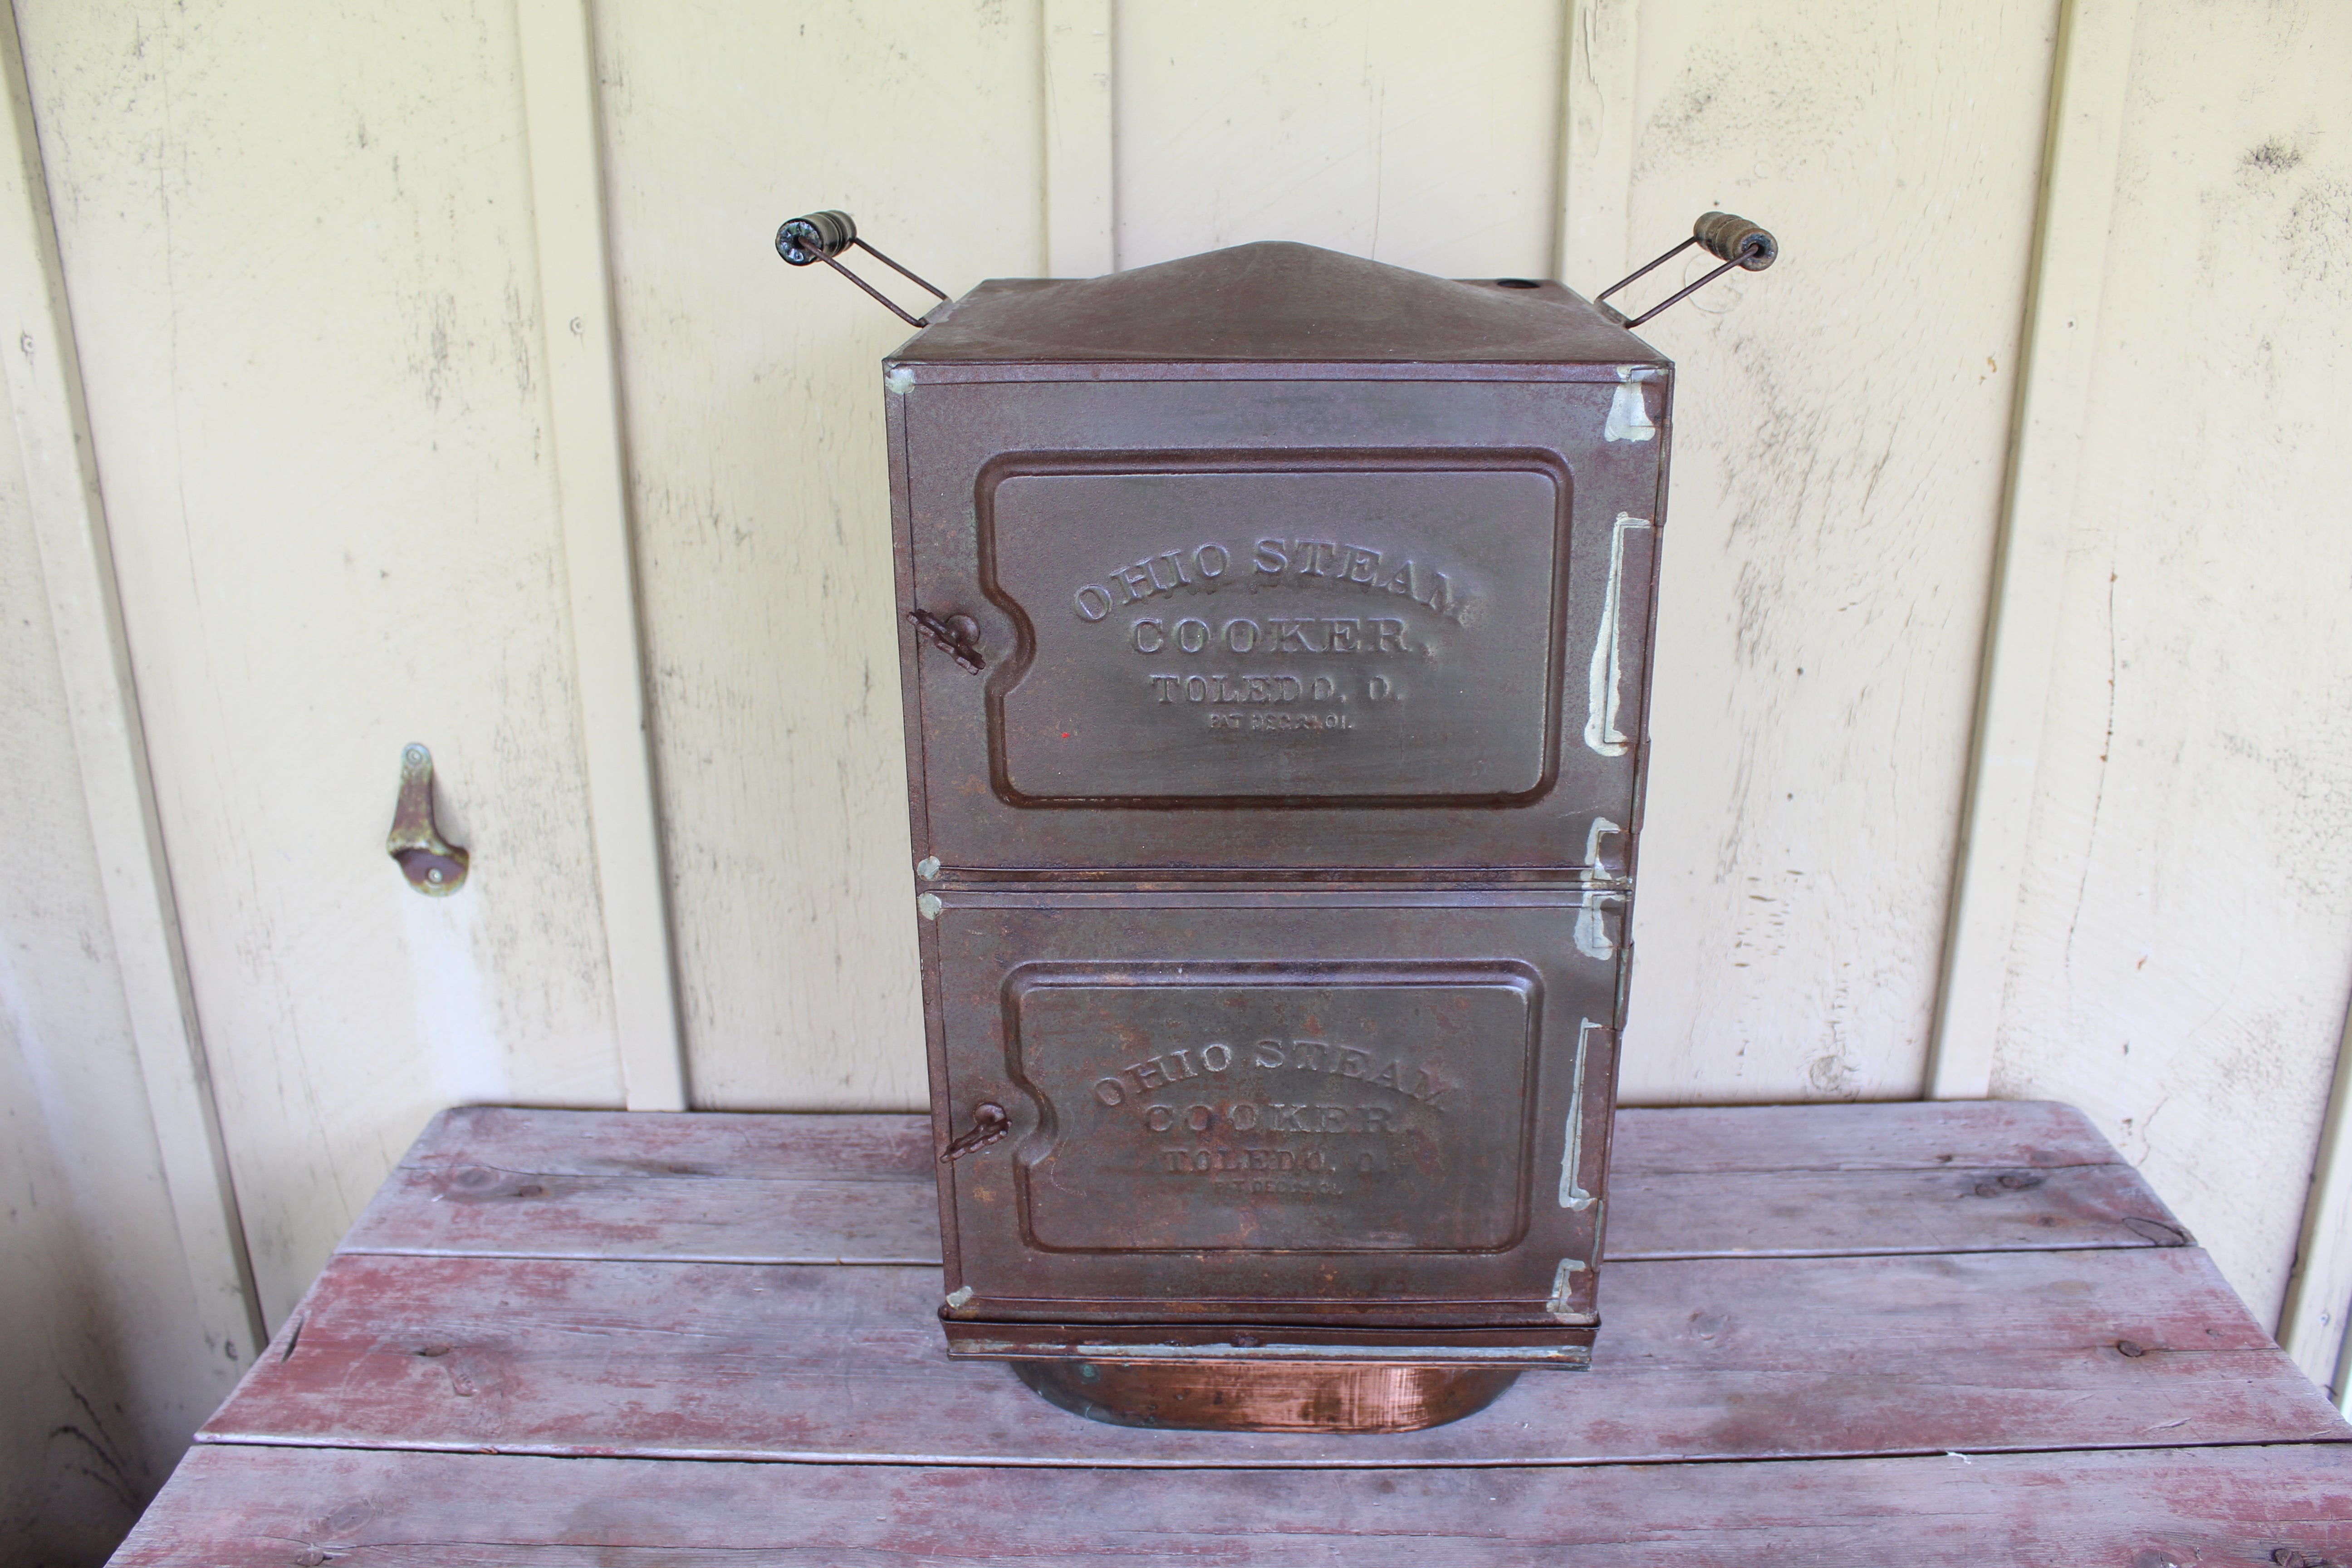 Old Antique Ohio Steam Cooker - Patented 1901